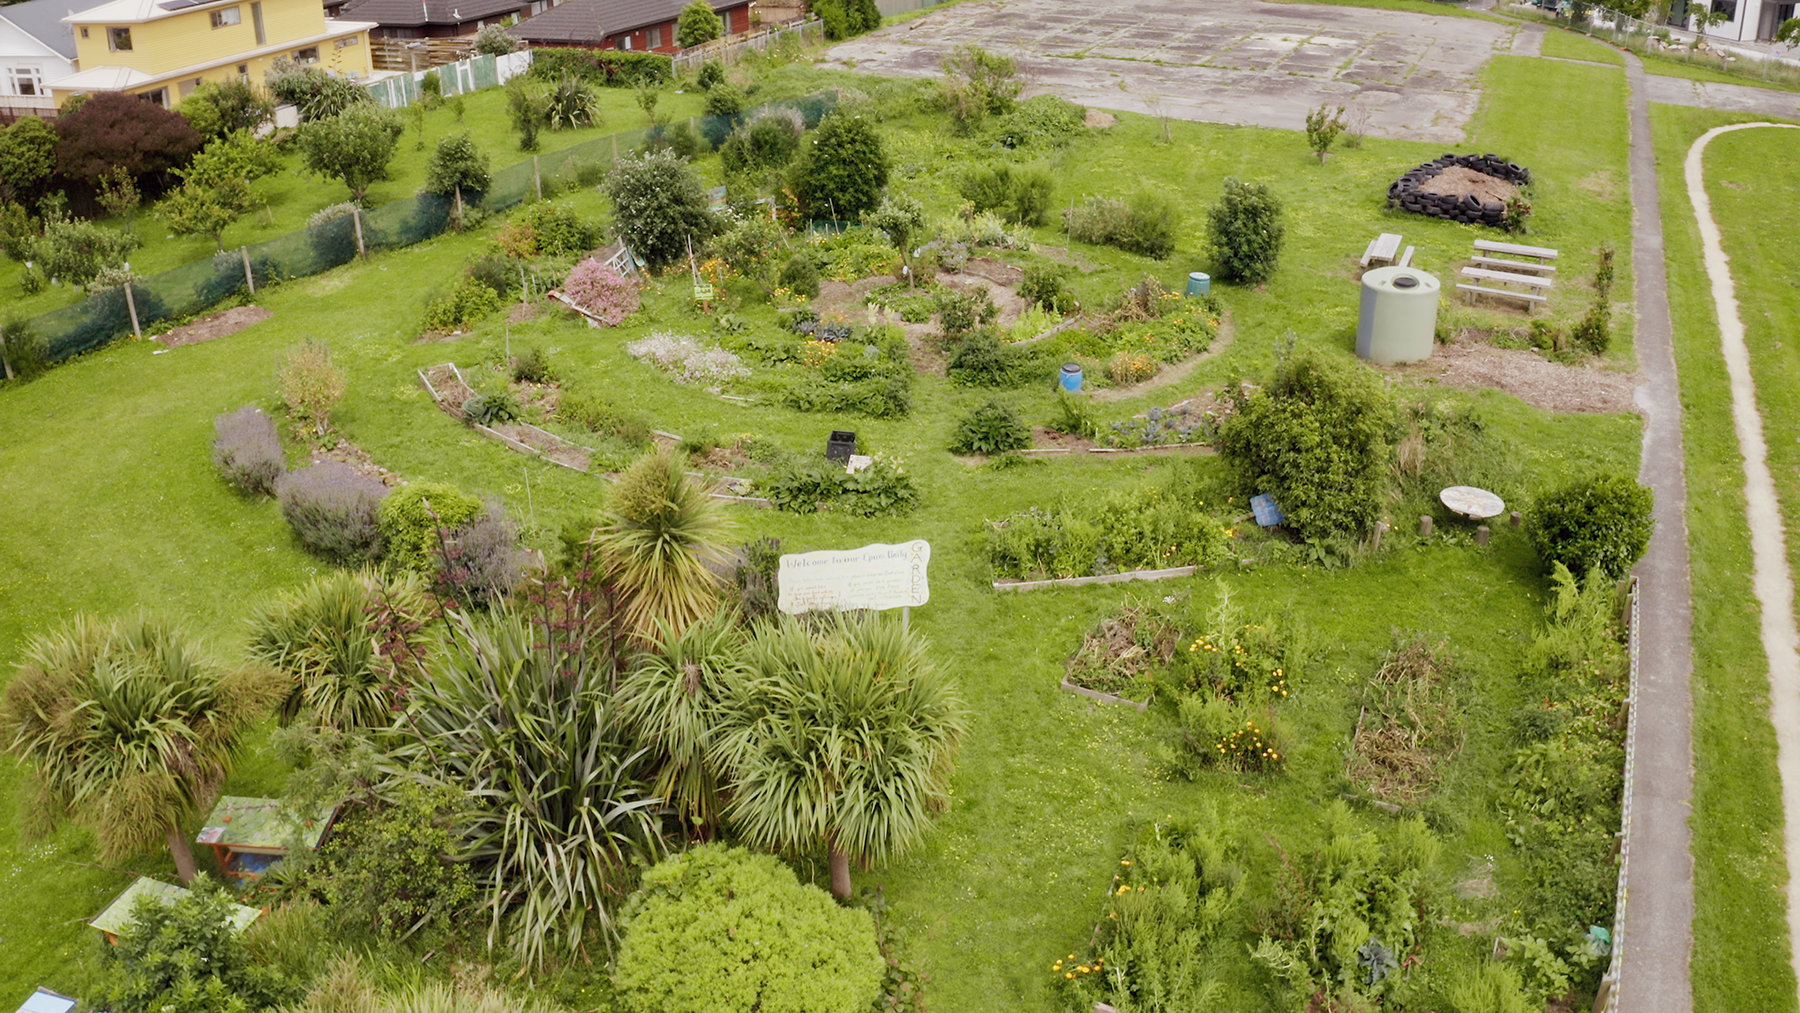 Epuni community garden is a hub of wellbeing, photgraphed by Happen Films, New Zealand,